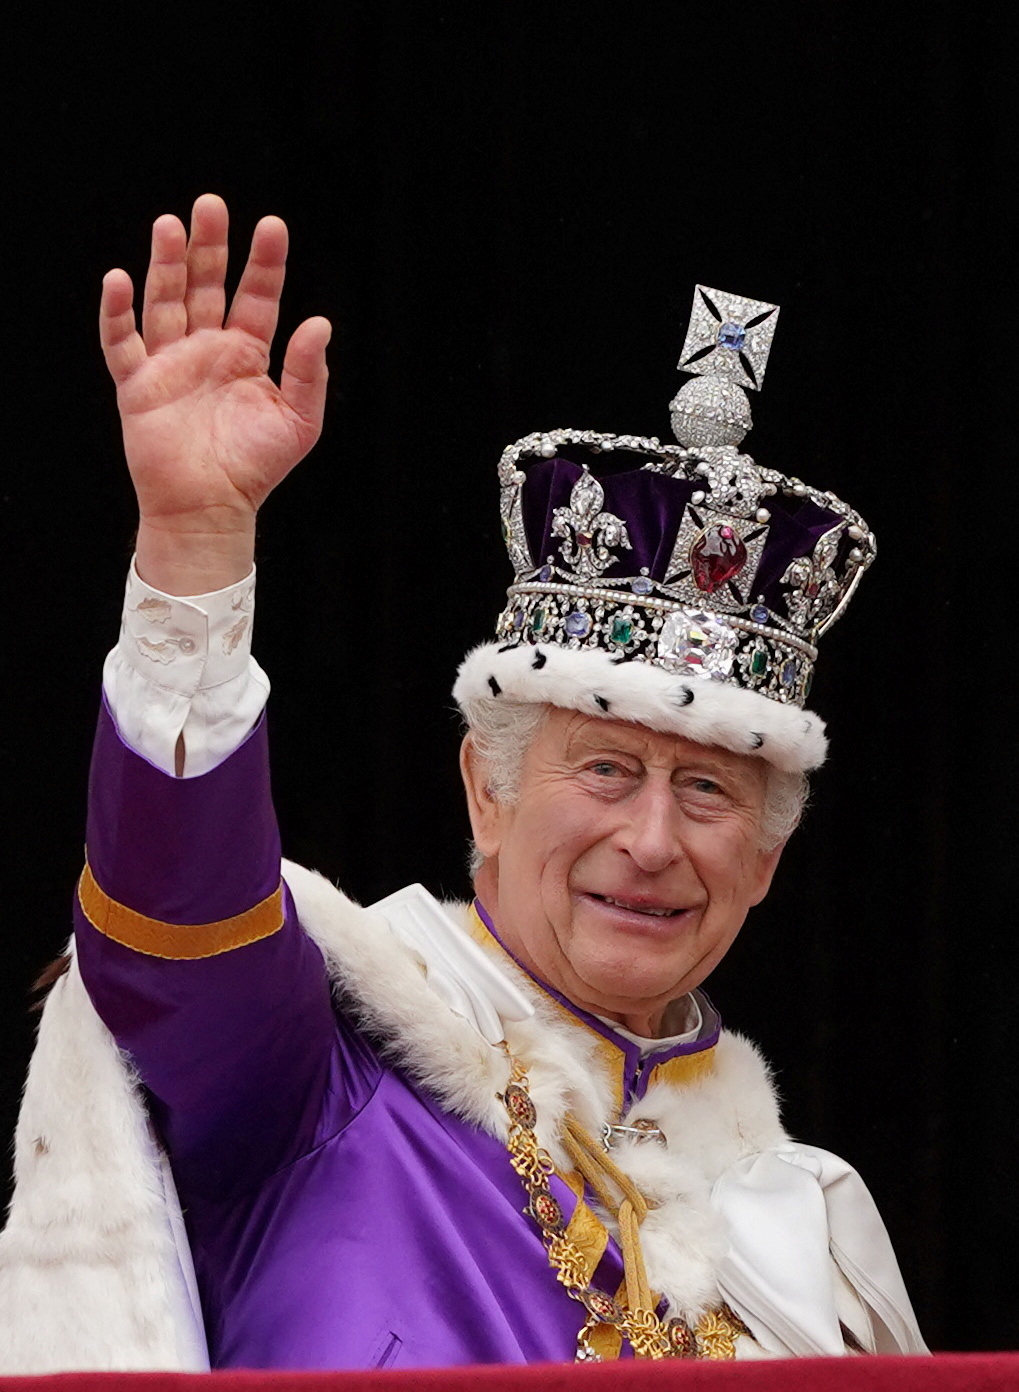 King Charles III waves as he leaves the balcony of Buckingham Palace following his coronation on May 6 in London. The recent focus on him has brought to mind how lucky Singaporeans are to not have to bend the knee to a royal – although that has not always been the case. Photo: Reuters